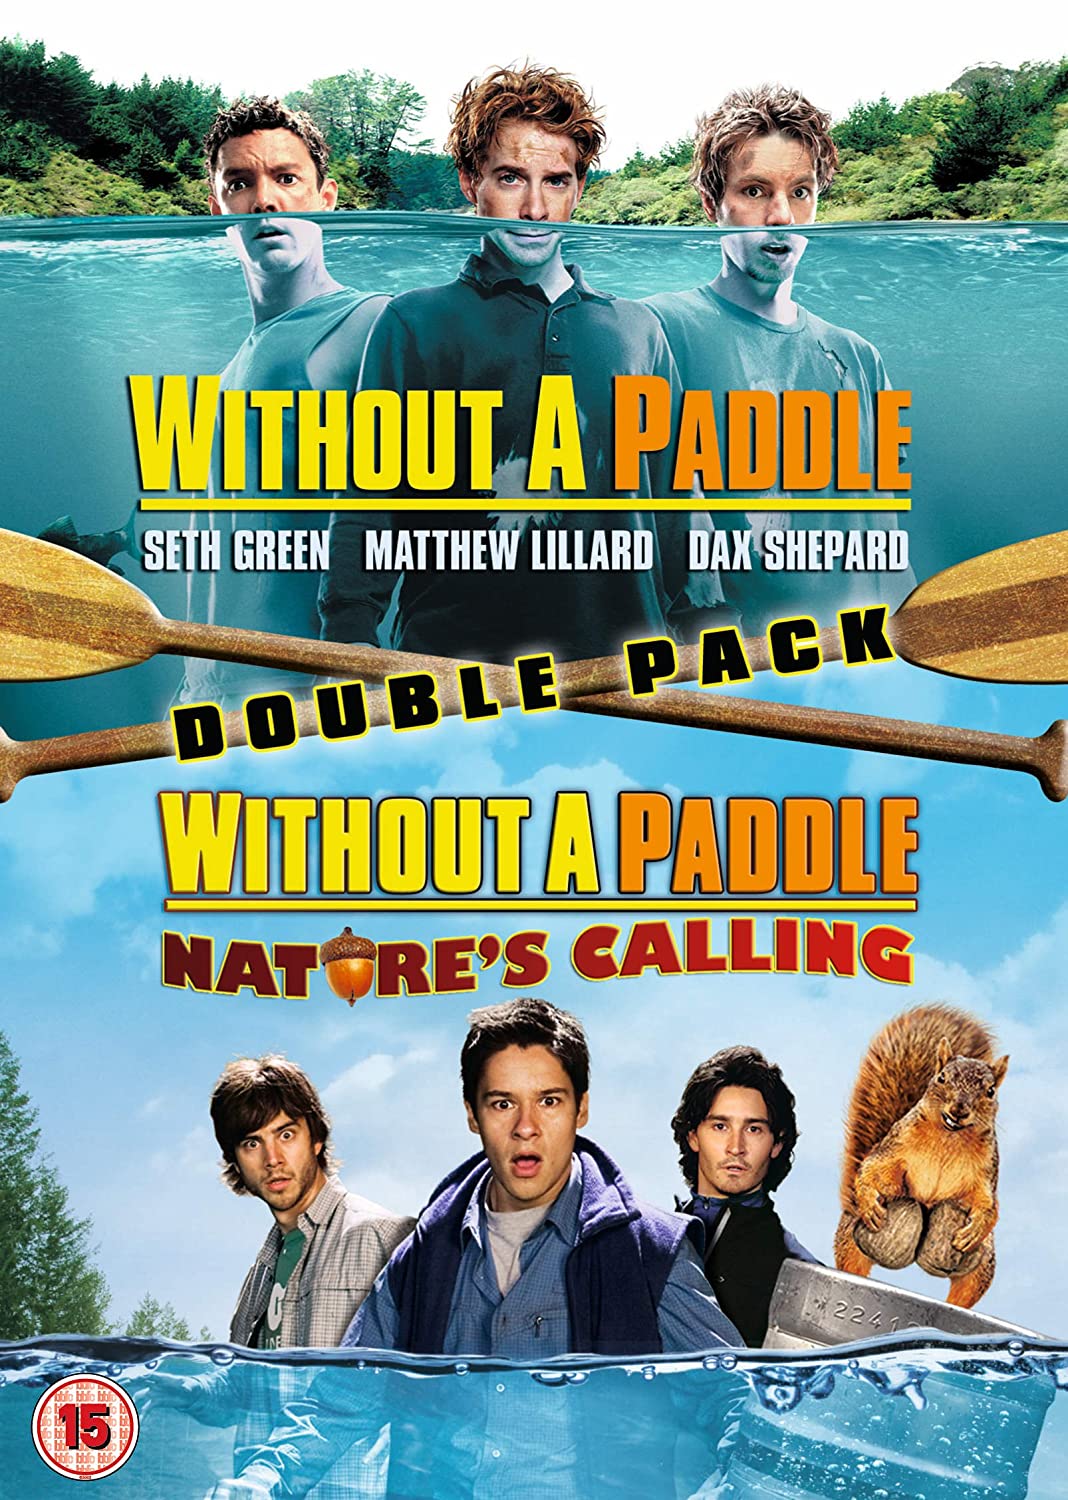 Without a paddle full movie free die verbindung